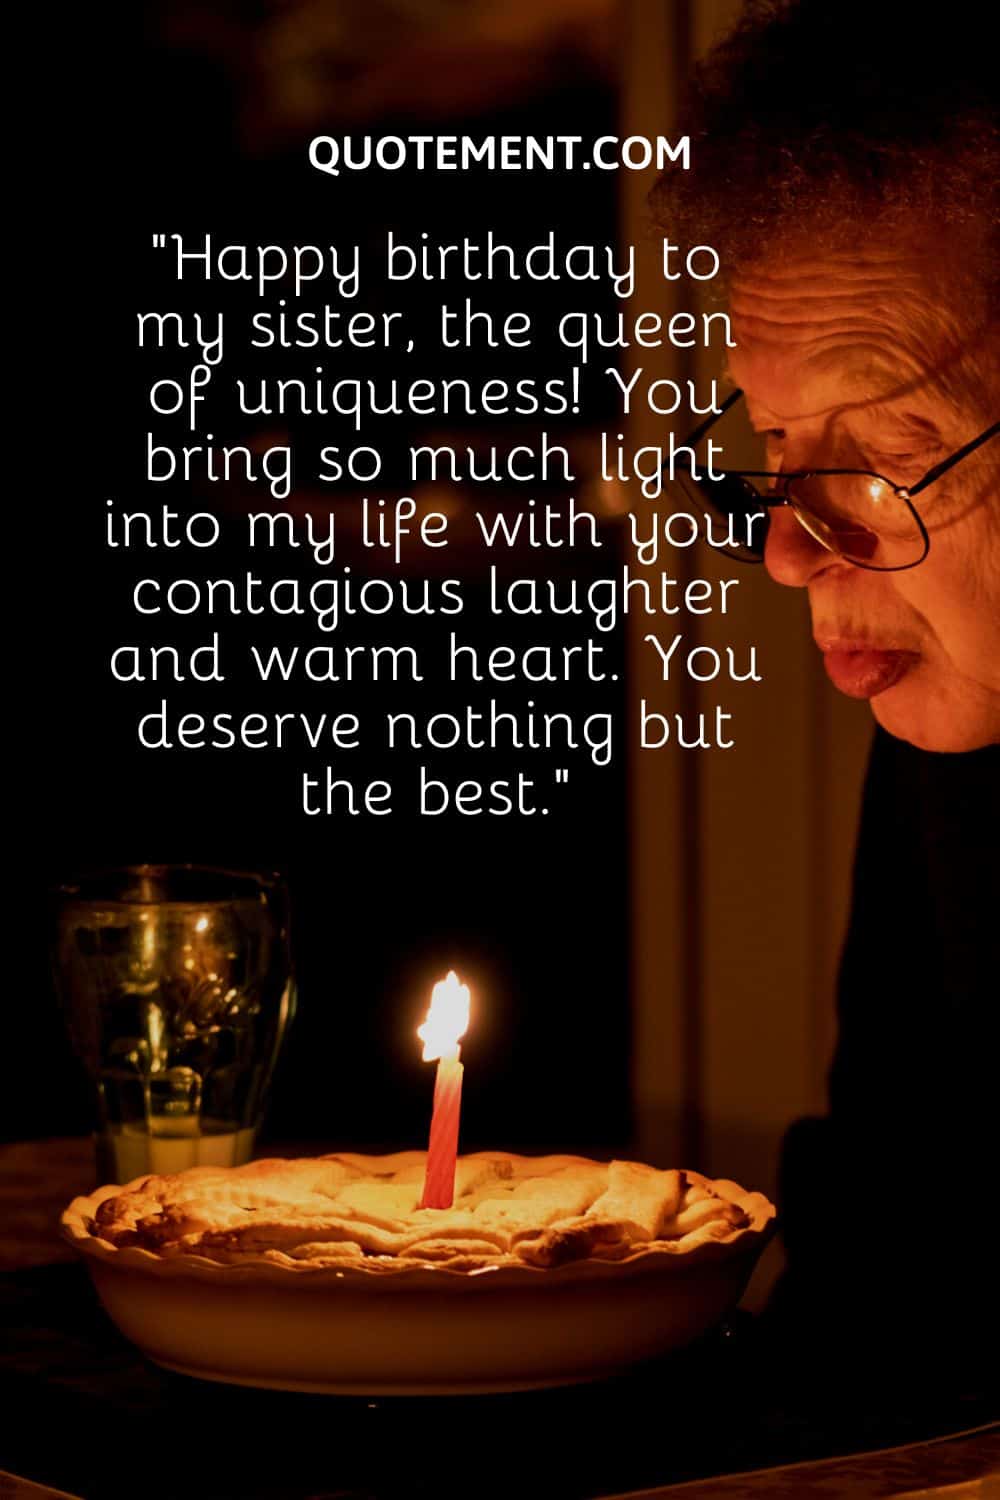 an older woman blowing candle on a pie
